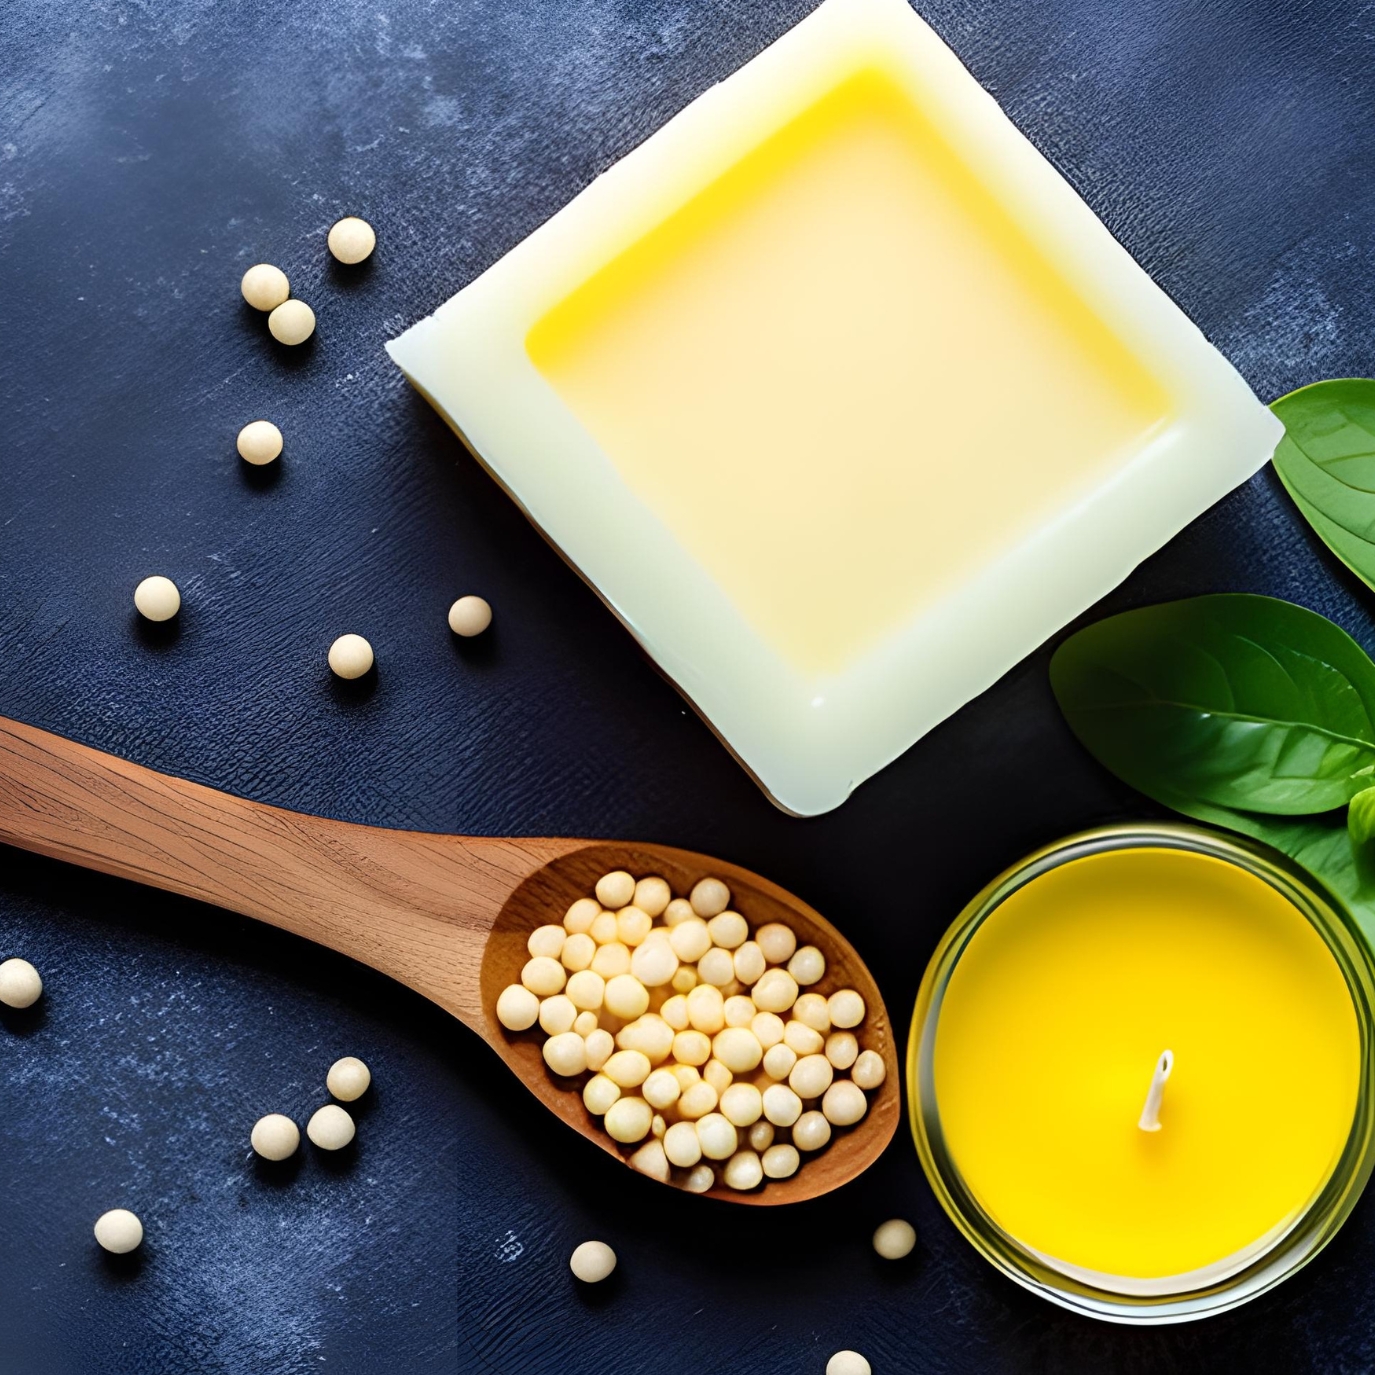 Mastering Candle Wax: Soy, Beeswax, and Paraffin advantages - Candlewic:  Candle Making Supplies Since 1972